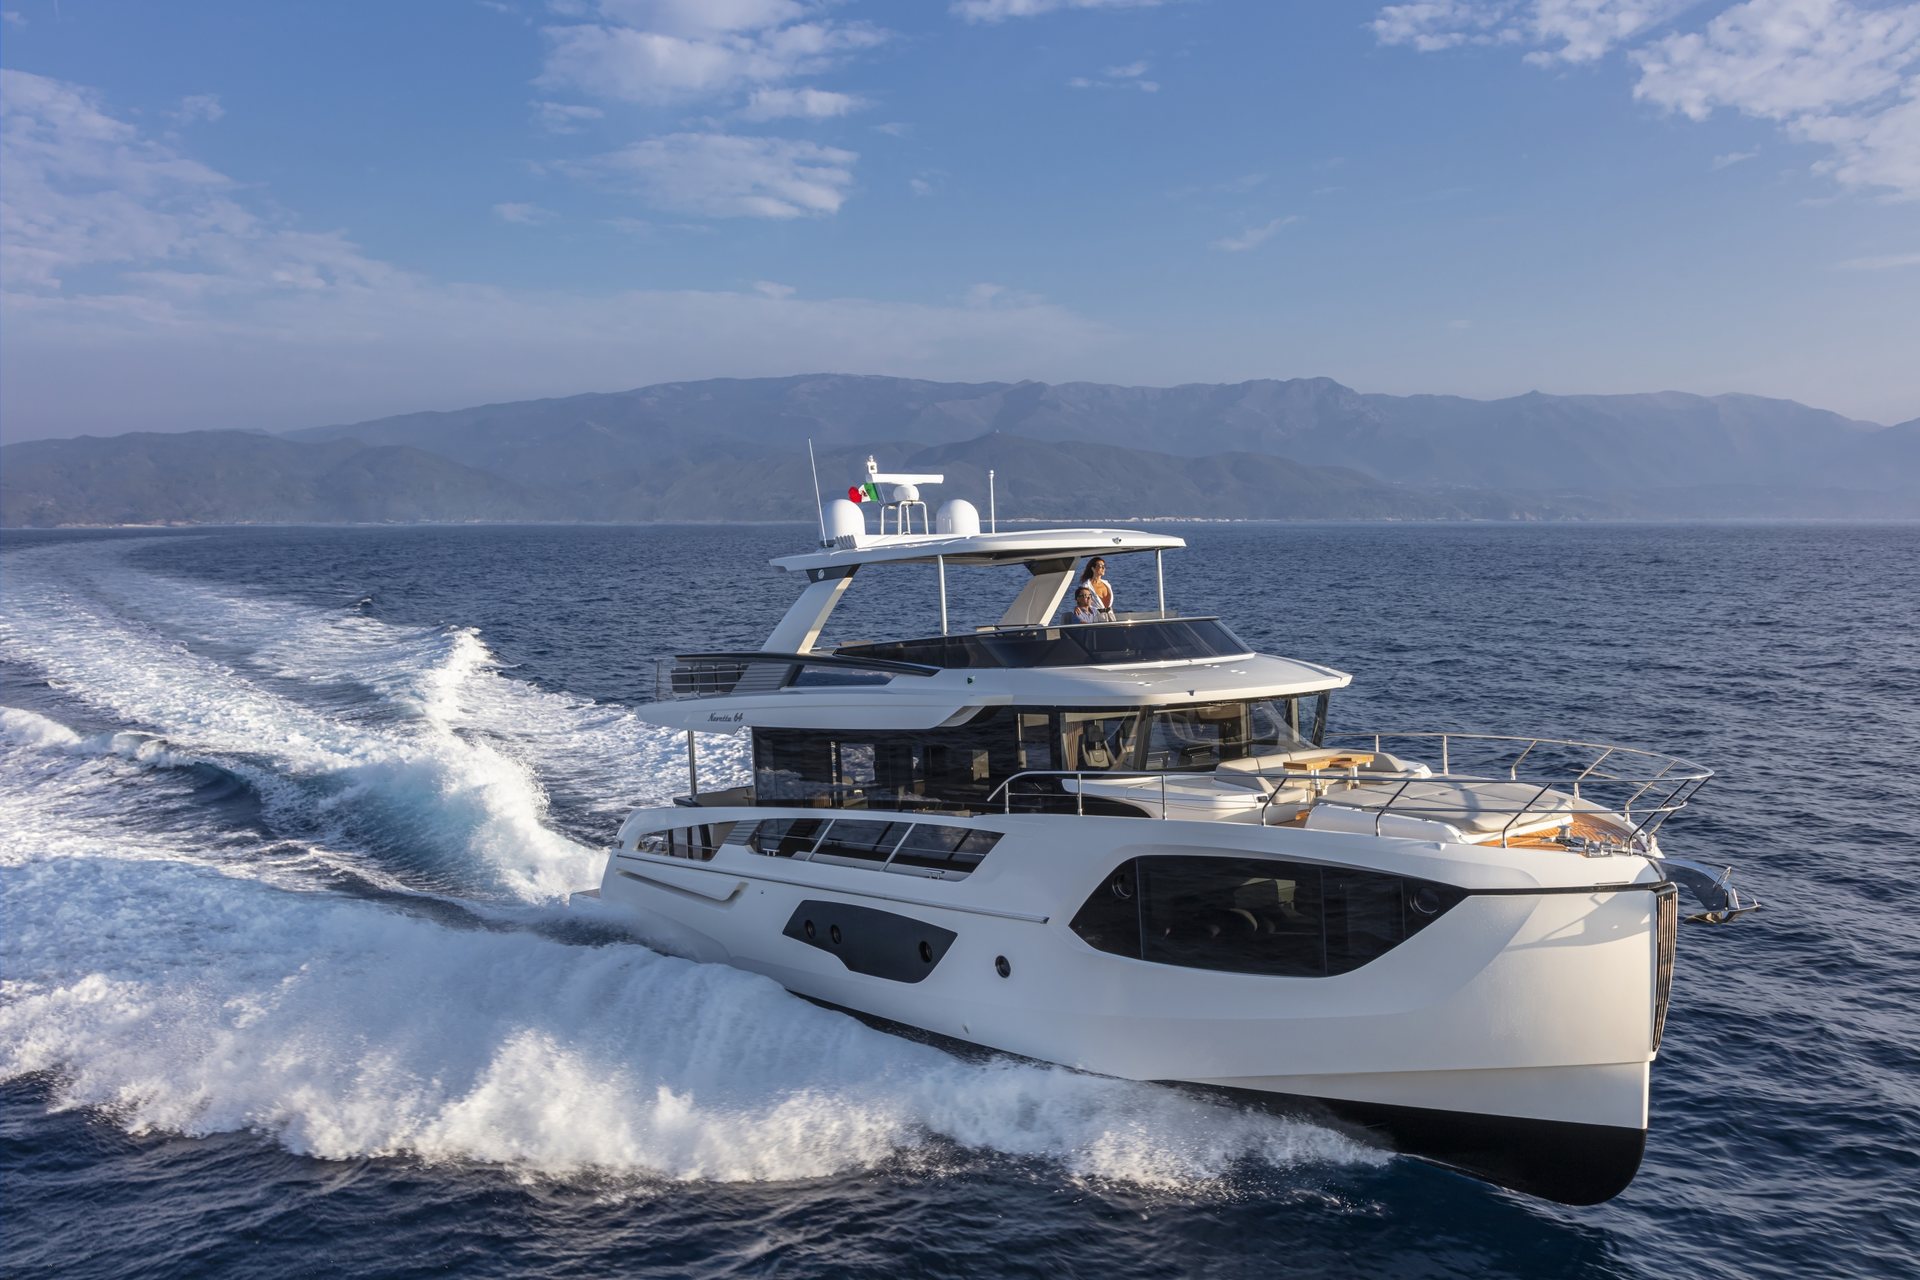 360 VR Virtual Tours of the Absolute Navetta 64